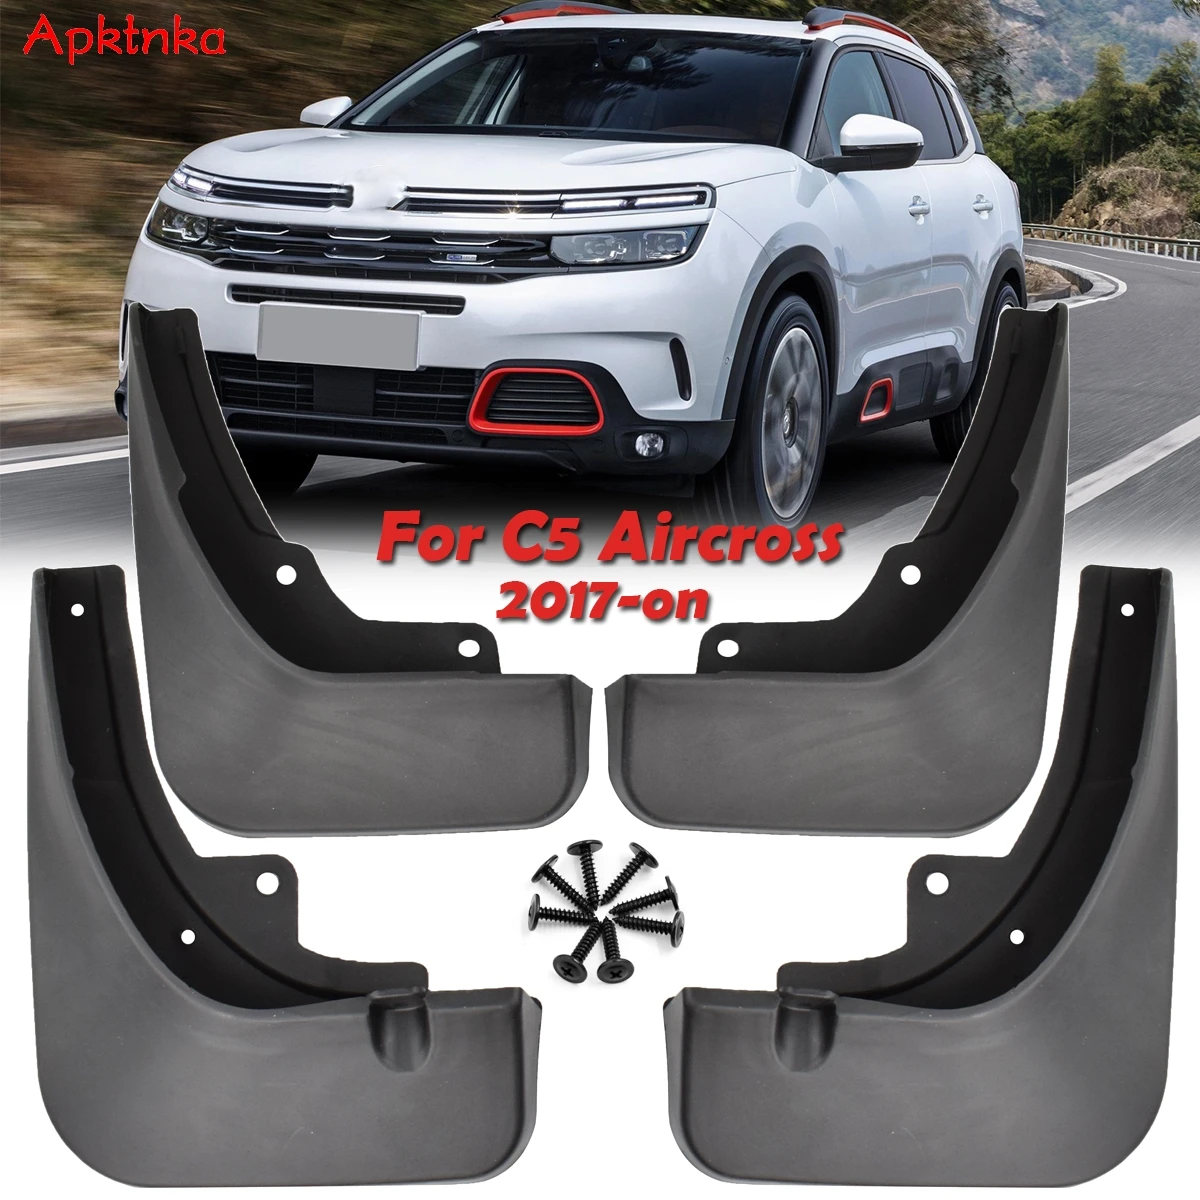 Front Rear Mud Flaps For Citroen C5 Aircross 2017 2018 2019 2020 Mudflaps Splash Guards Flap Mudguards OE/OEM Number 1636054780